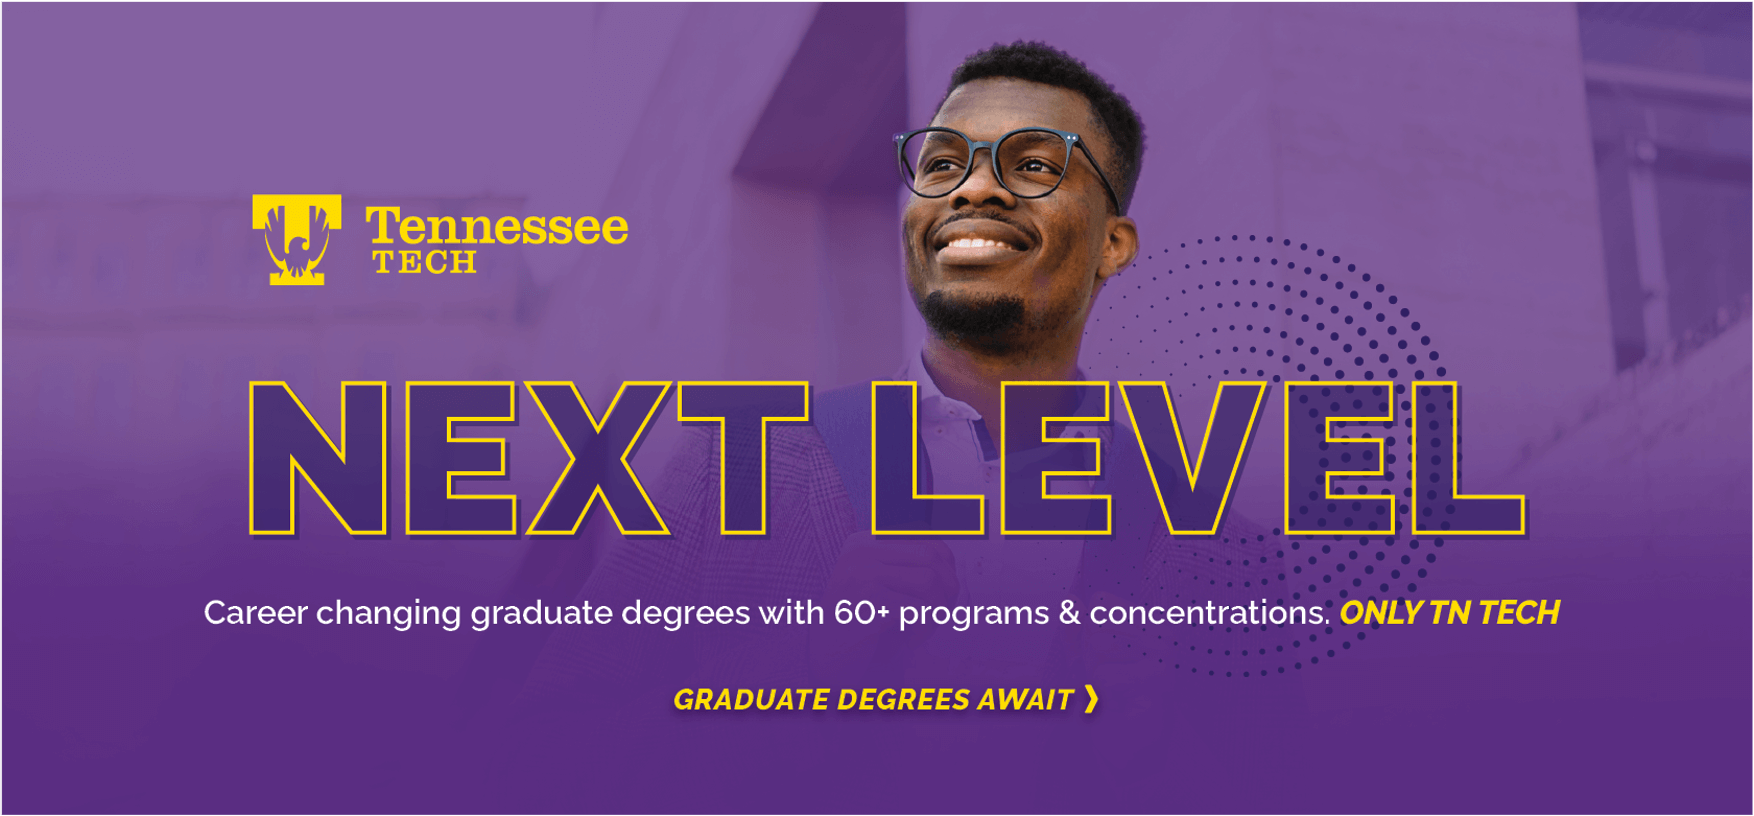 ӰƵ - Next Level - Career changing graduate degrees with 60+ programs and concentrations. Only TN Tech.